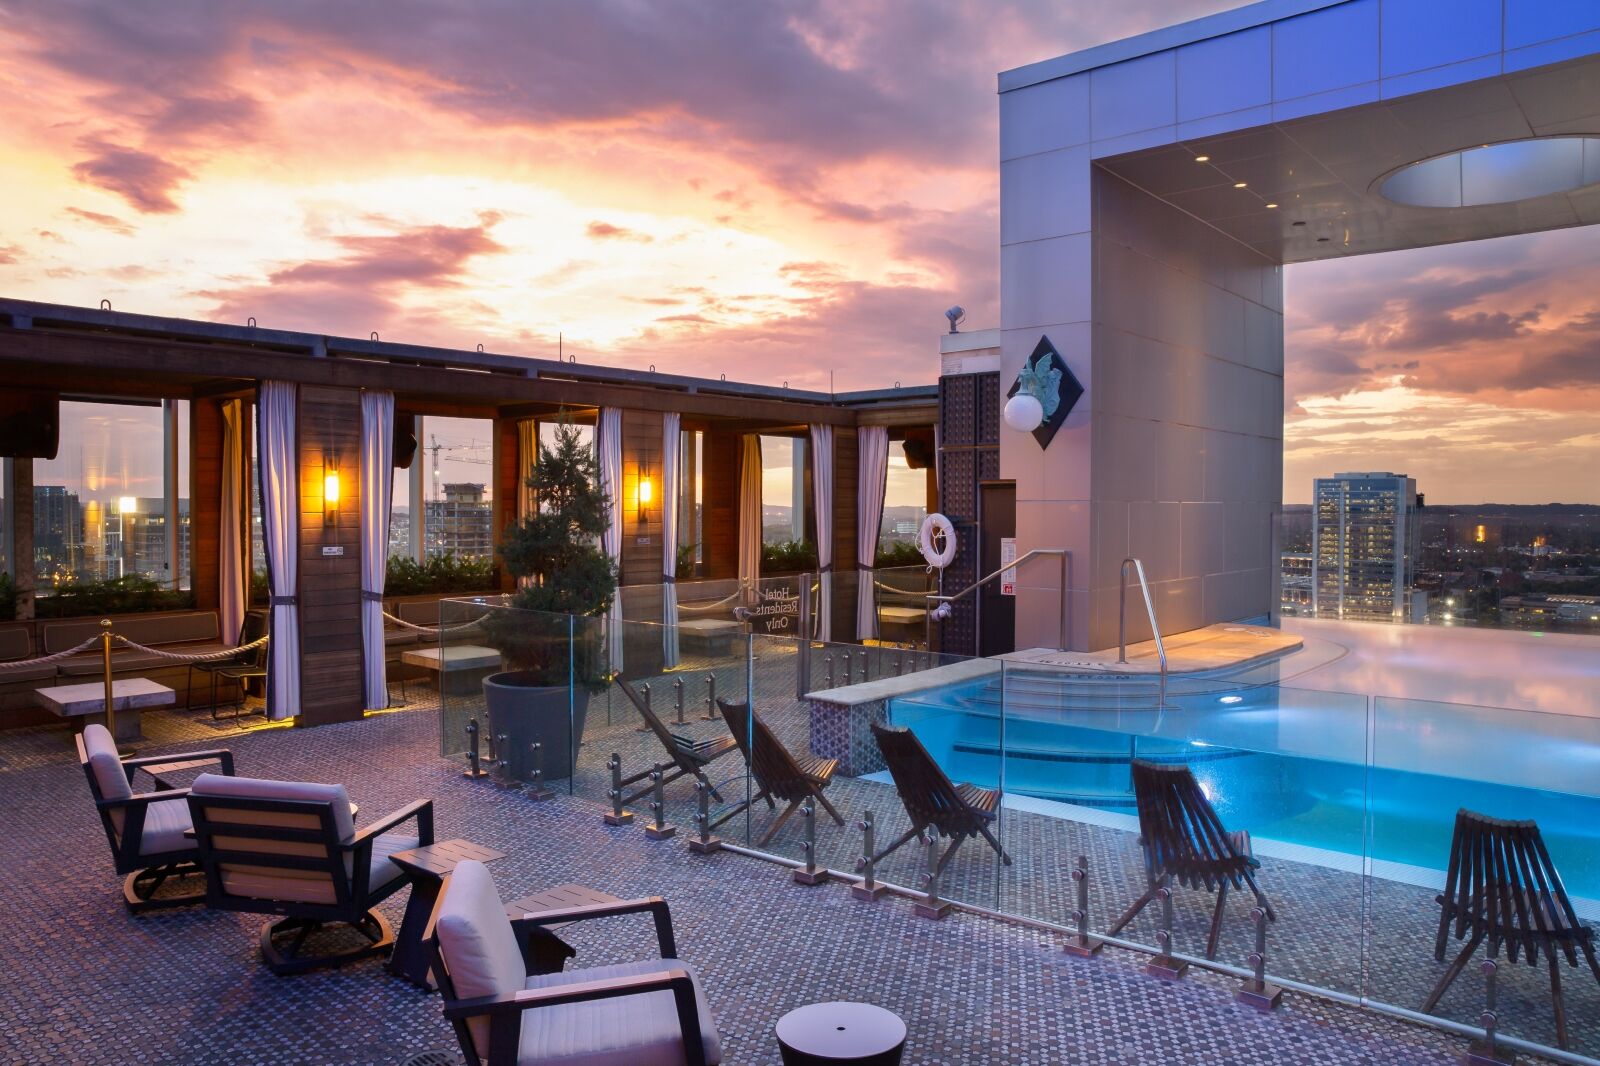 Nashville rooftop bar L27 with pool at sunset 